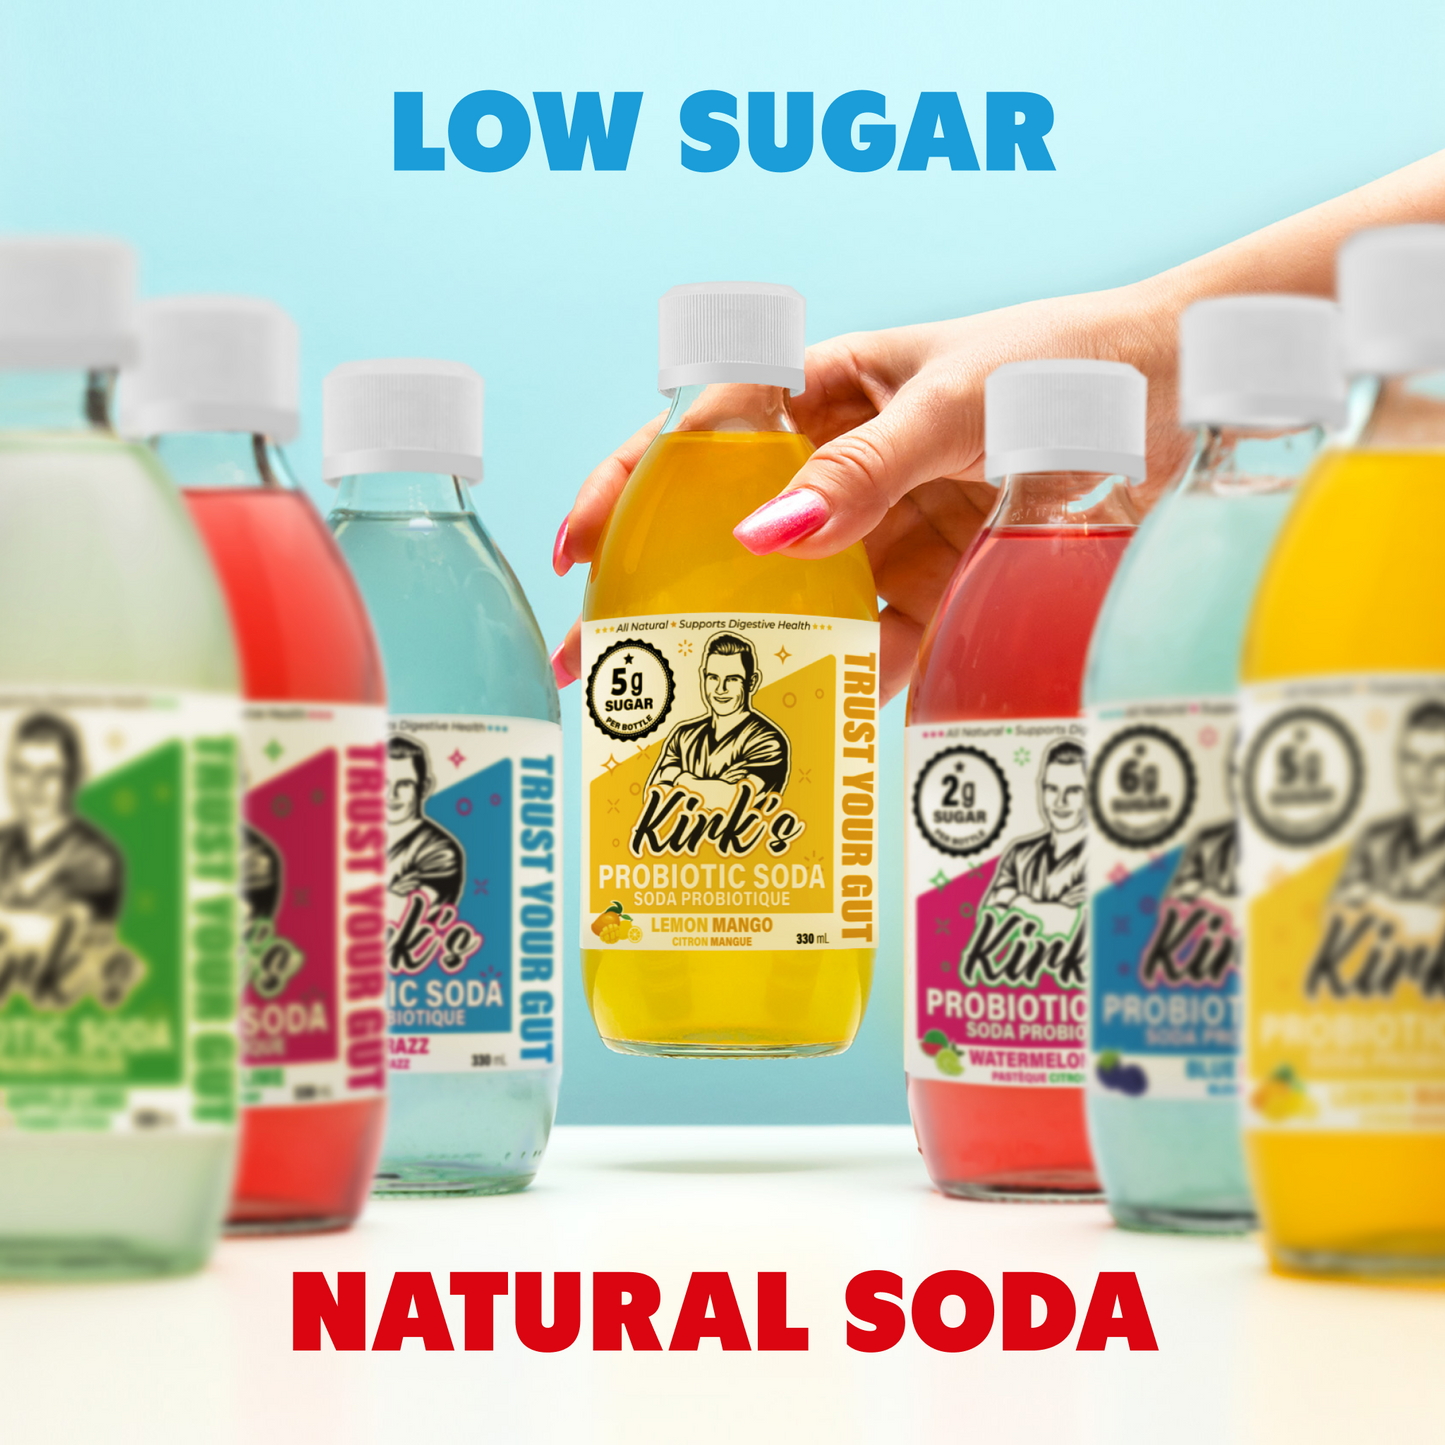 Image of different flavored probiotic sodas